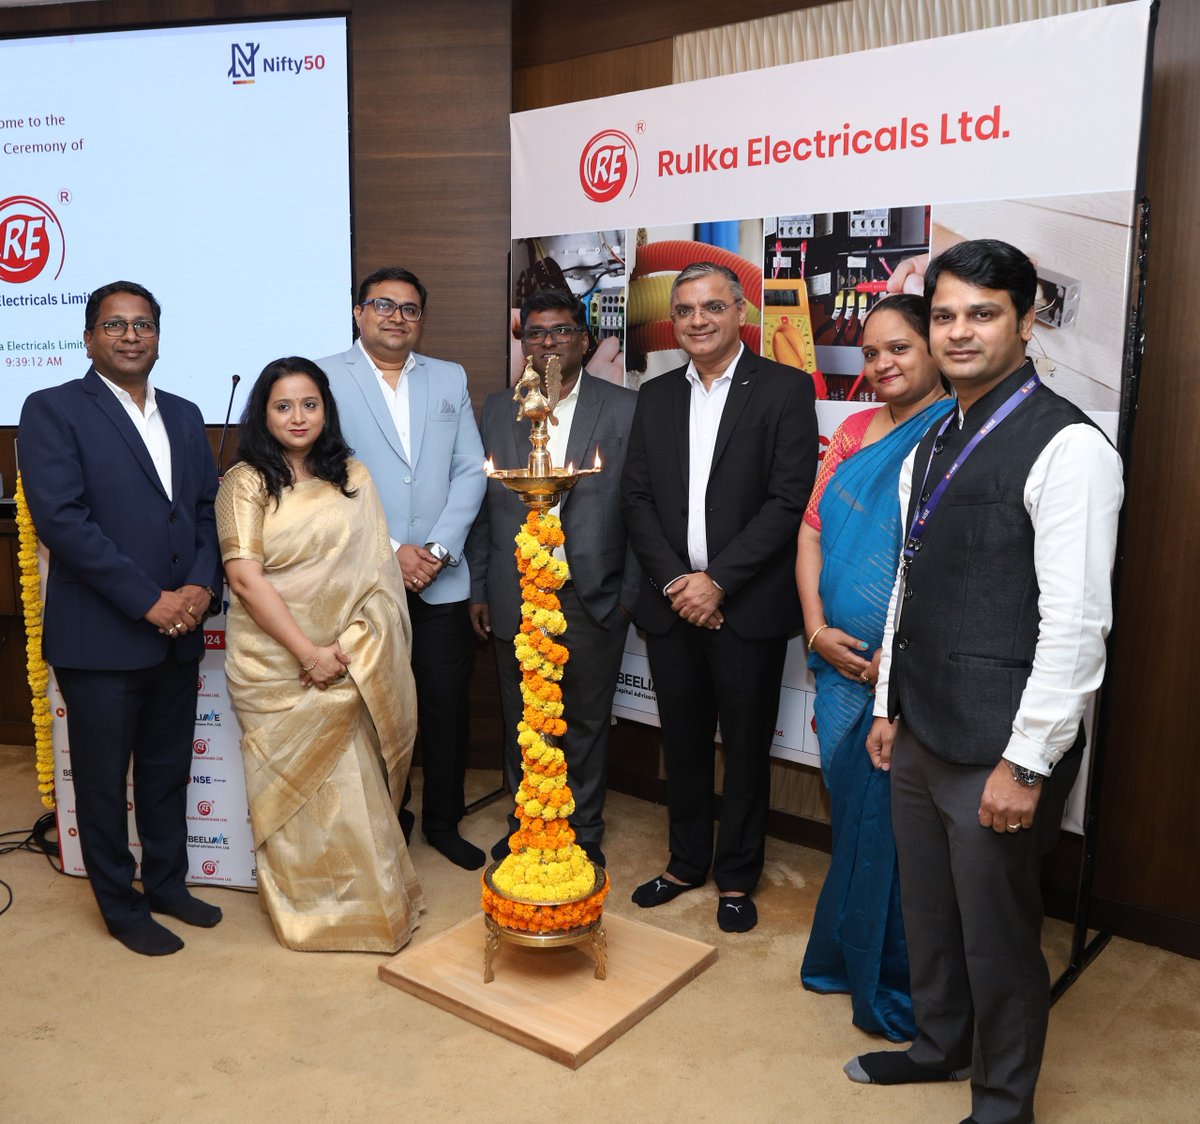 Congratulations Rulka Electricals Limited on getting listed on NSE Emerge today! The company is an electrical and Fire-Fighting solutions company. The public Issue was of Rs. 2,639.52 lakhs at an issue price of Rs.235 per share. #NSEIndia #NSEEmerge #listing #IPO #StockMarket